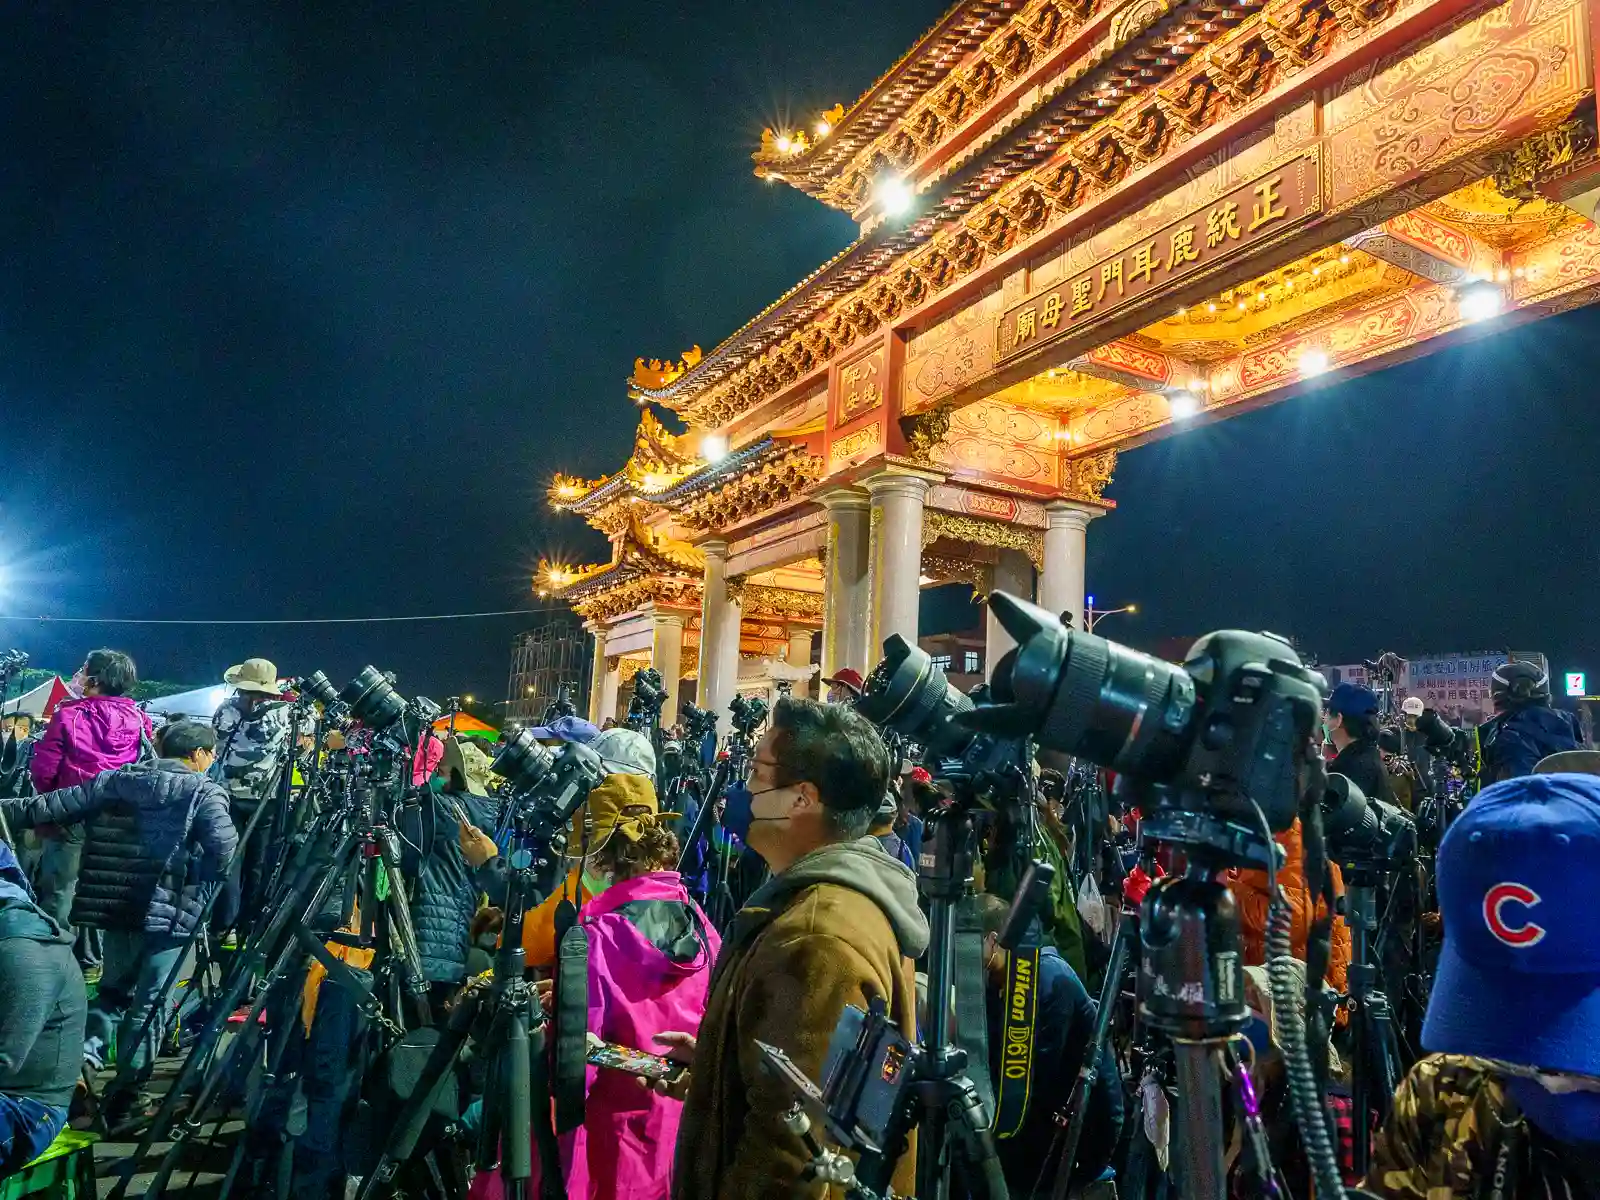 Hundreds of photographers with tripods set up await the beginning of the fireworks show.